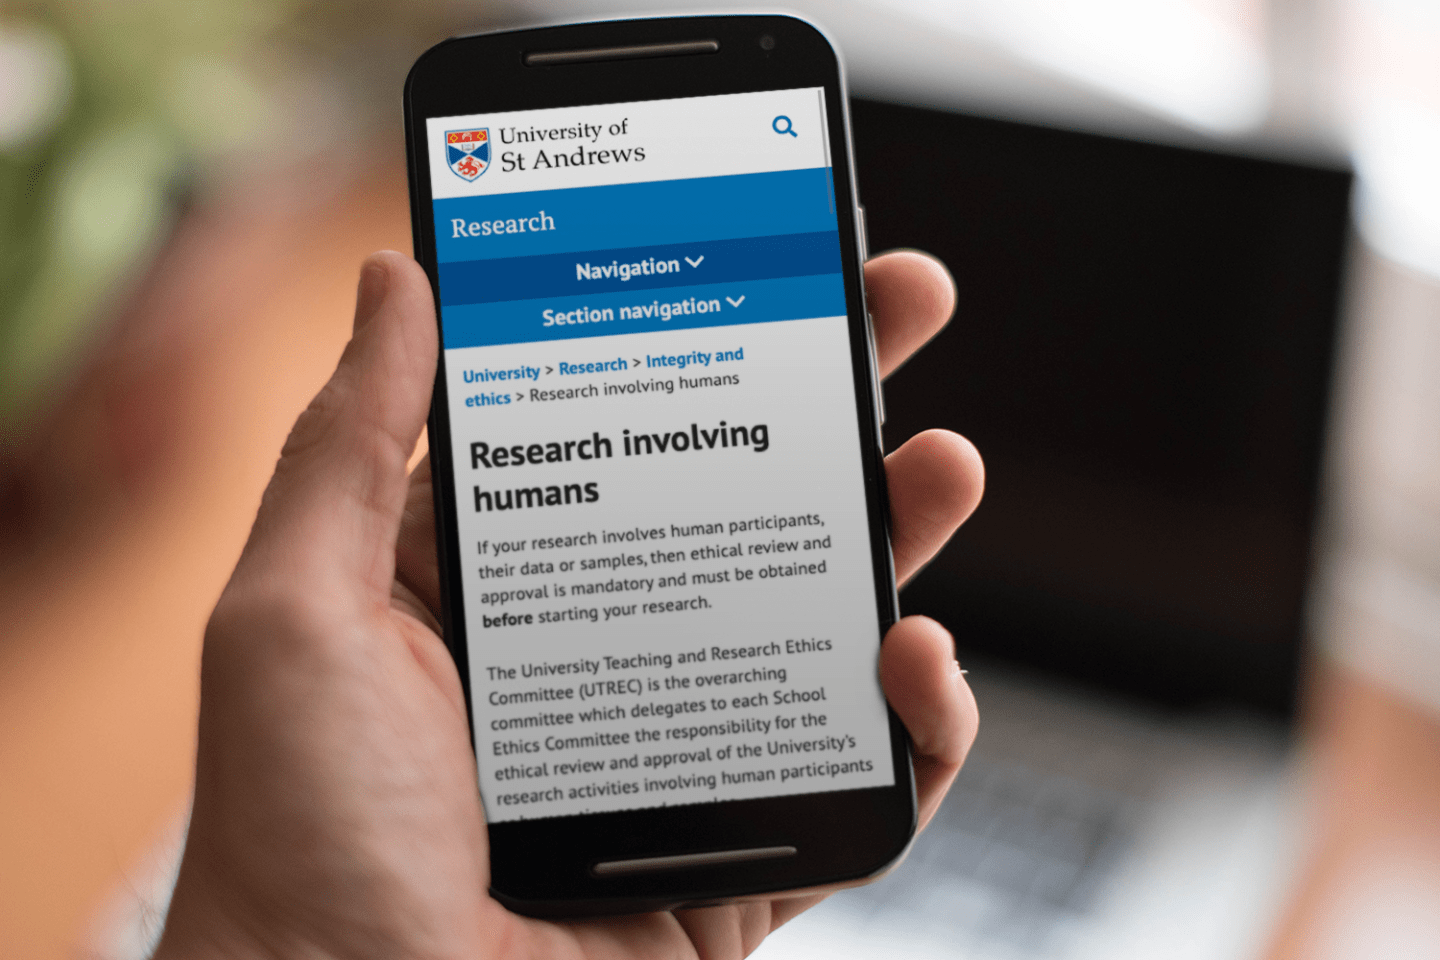 Hand holding mobile phone open to new "Research involving humans" section